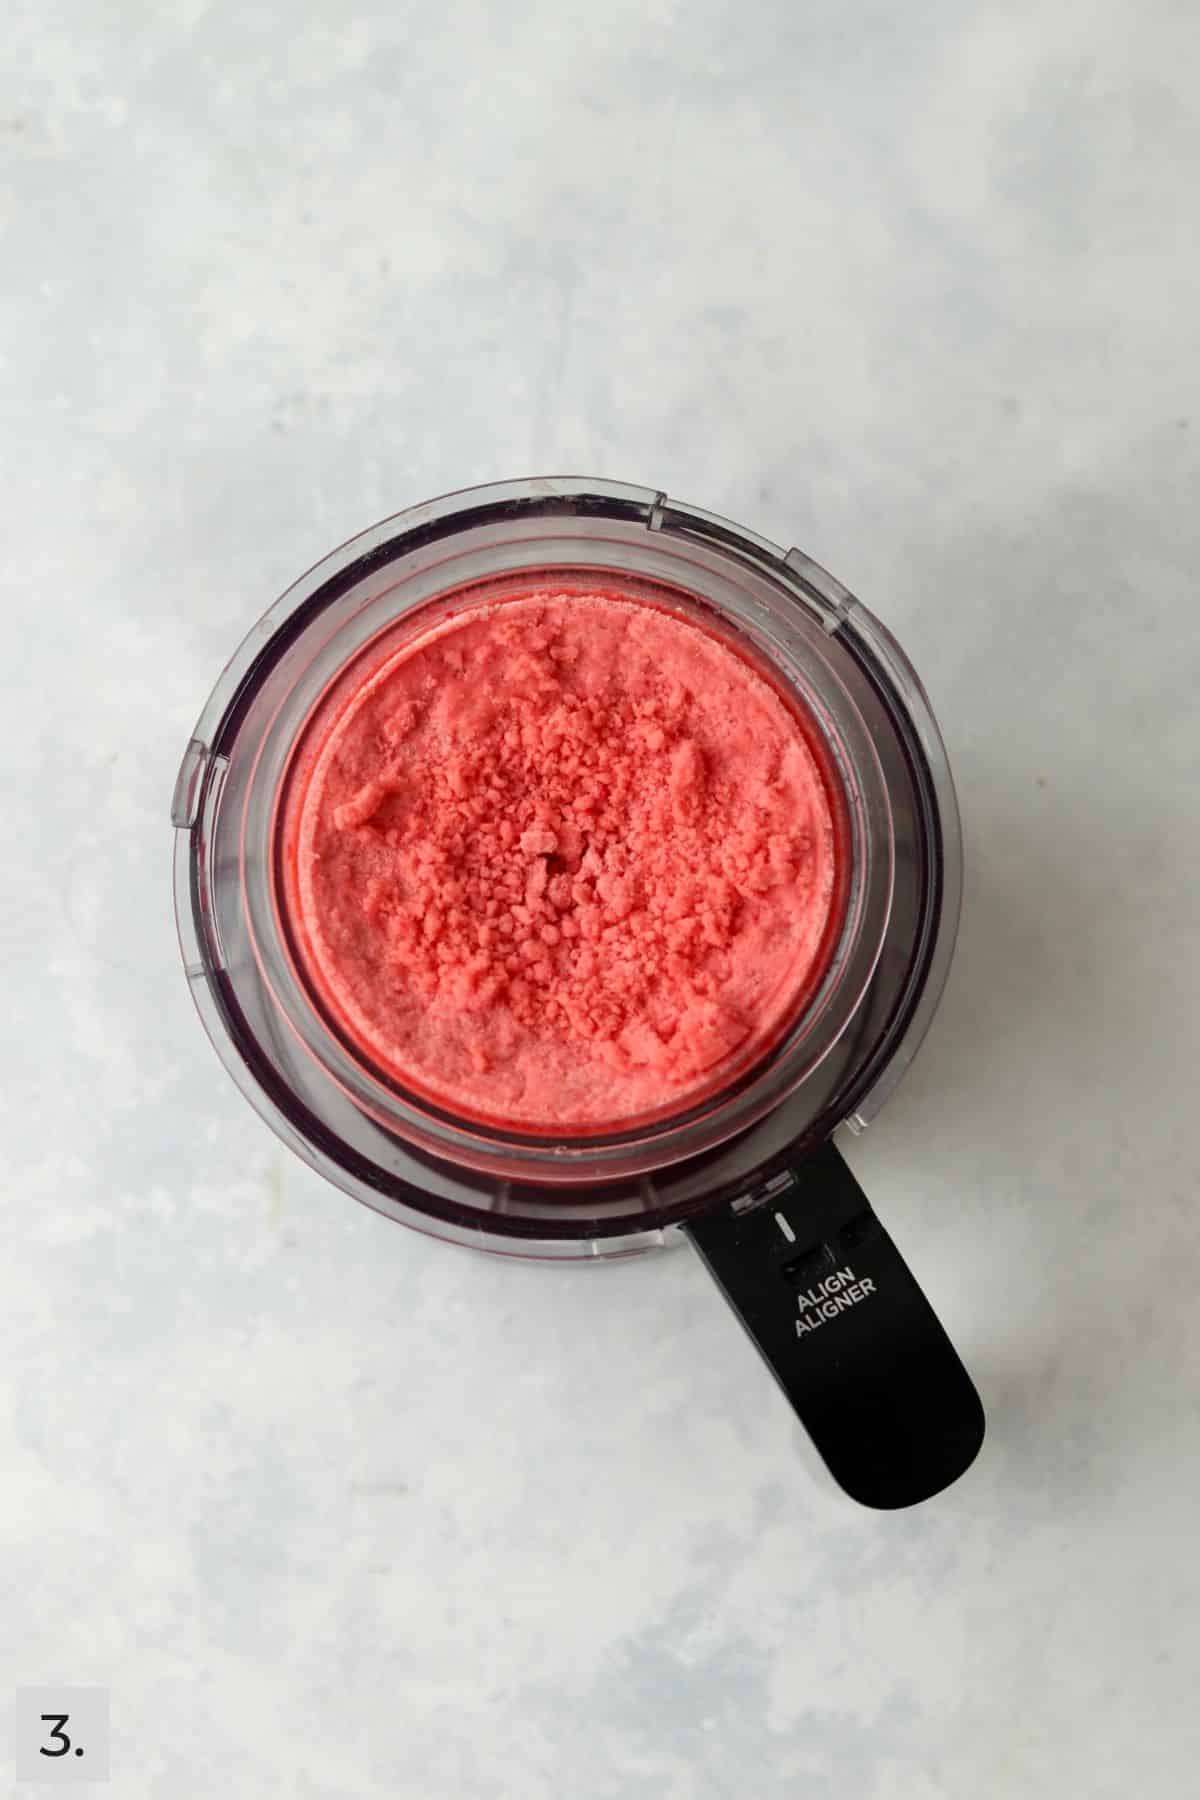 Crumbly blended strawberry sorbet in Ninja Creami.